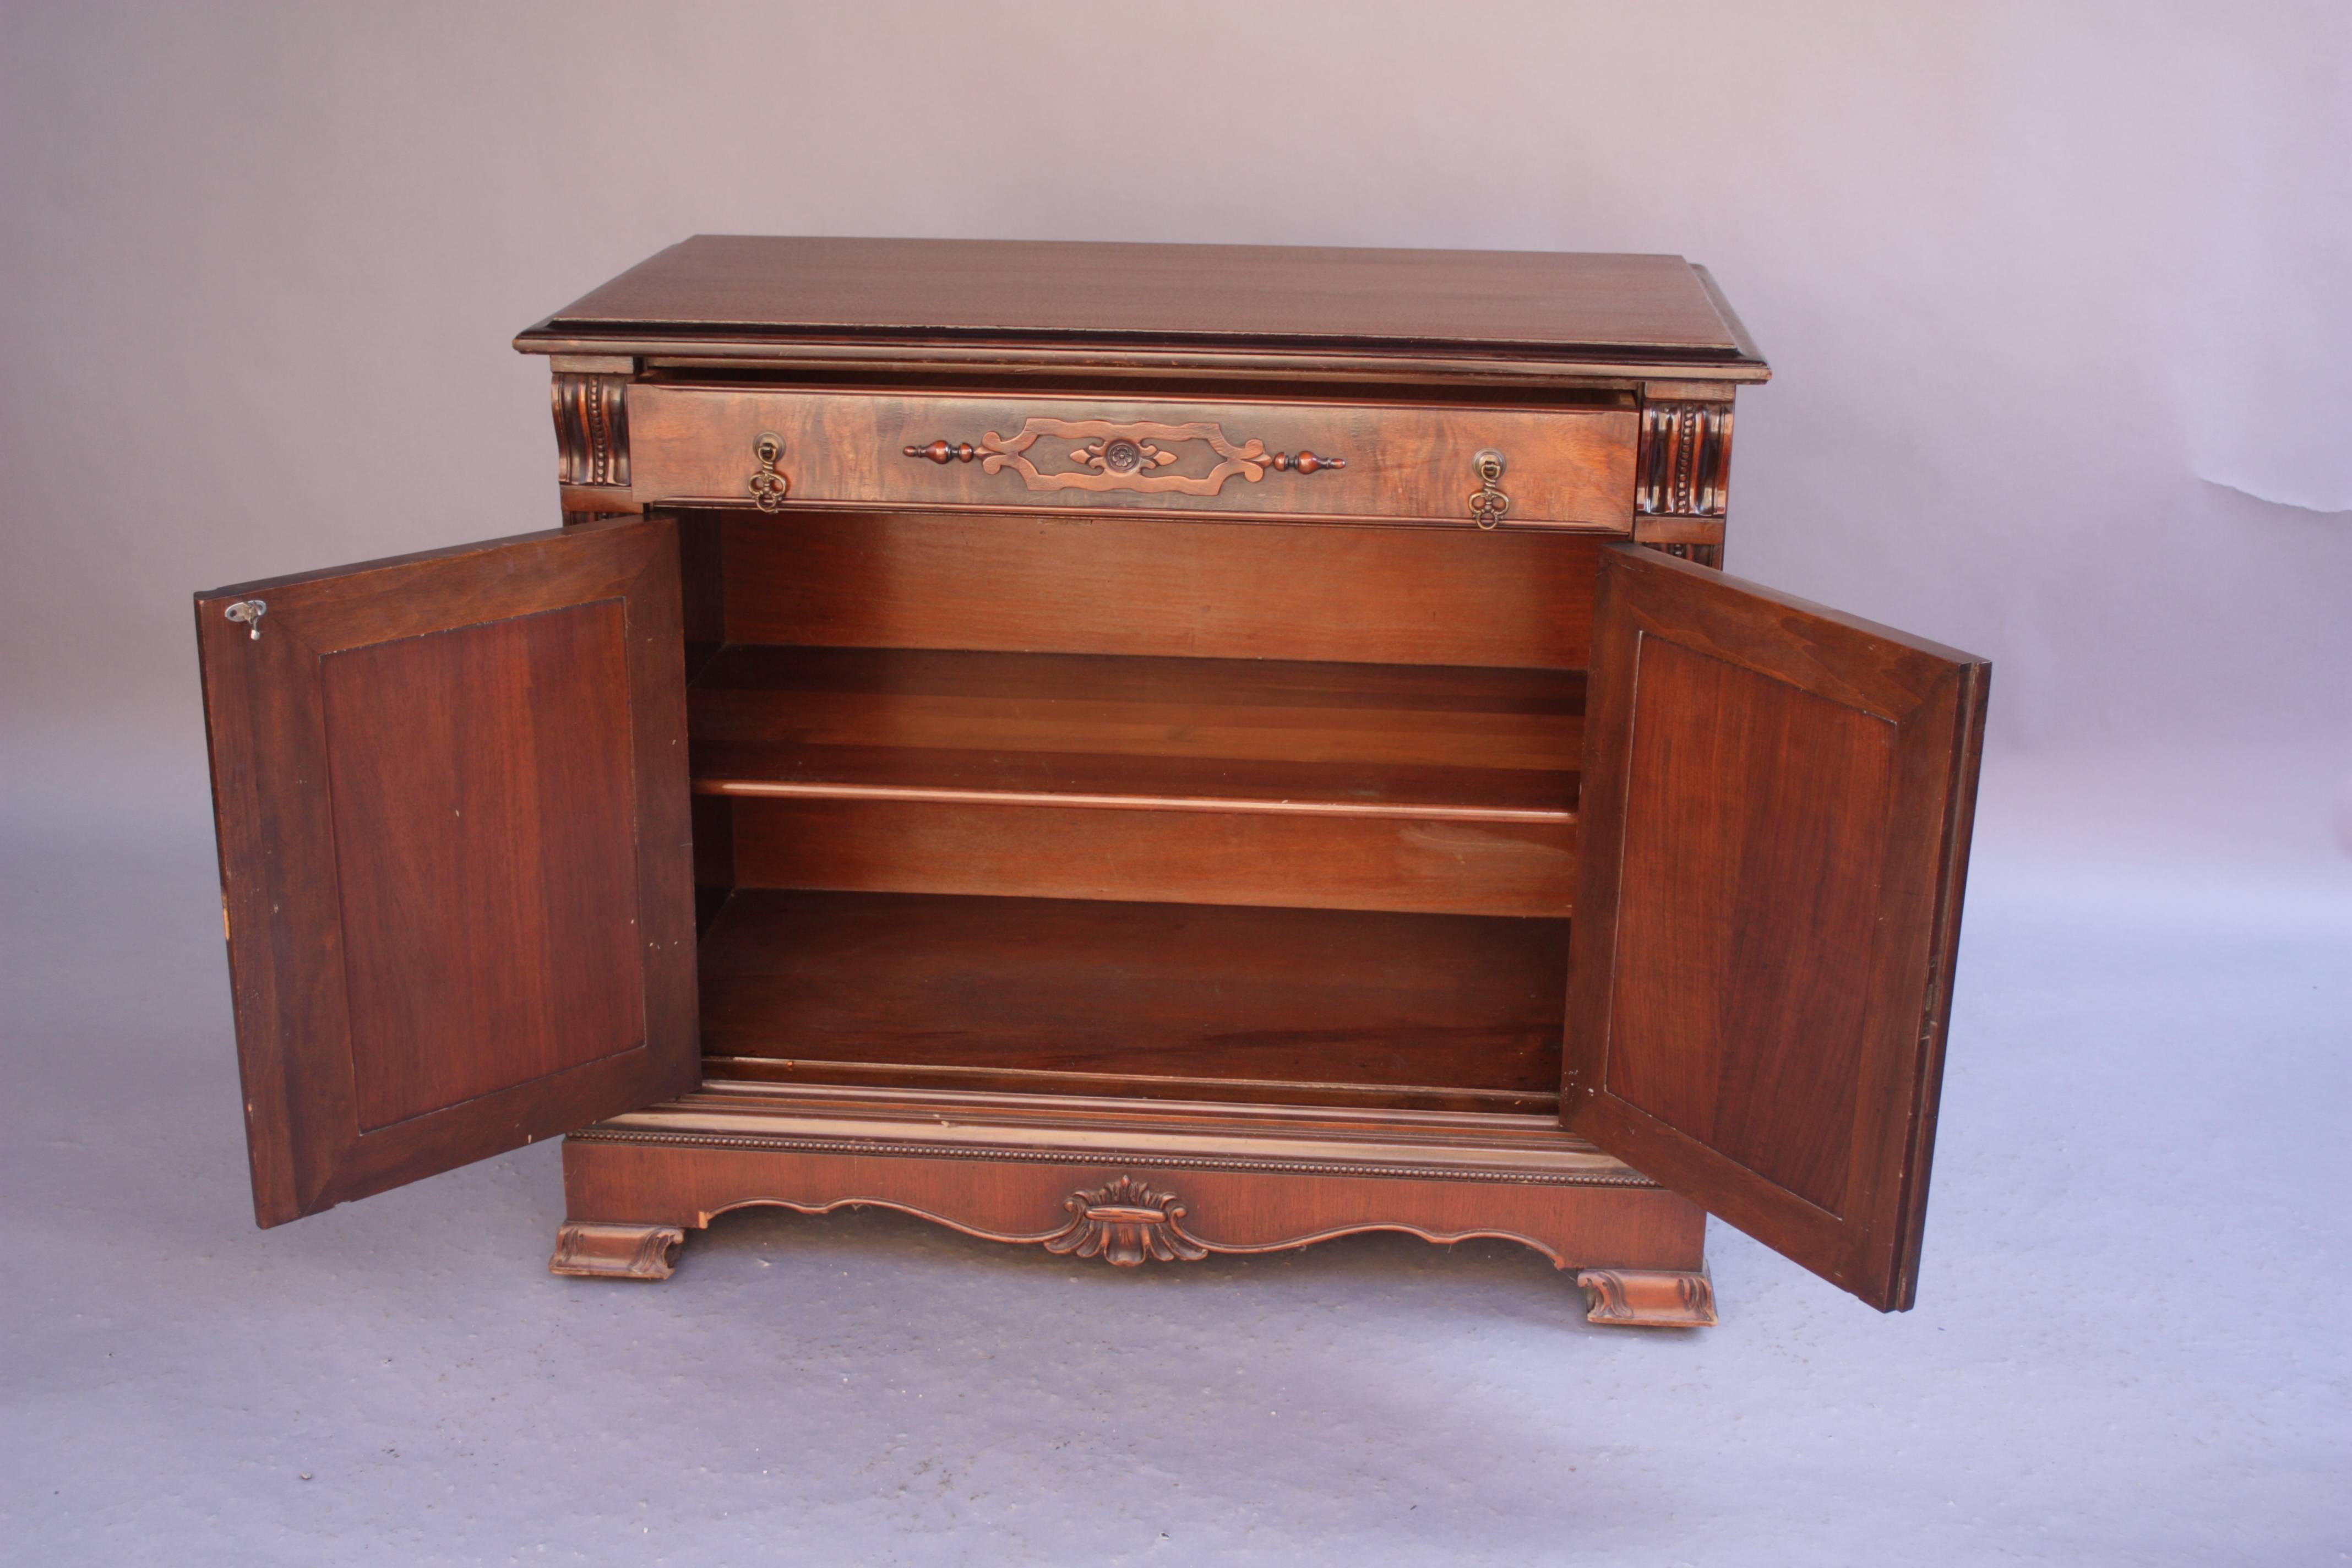 Early 20th Century Antique 1920s Smaller Scale Walnut Spanish Sideboard Cabinet